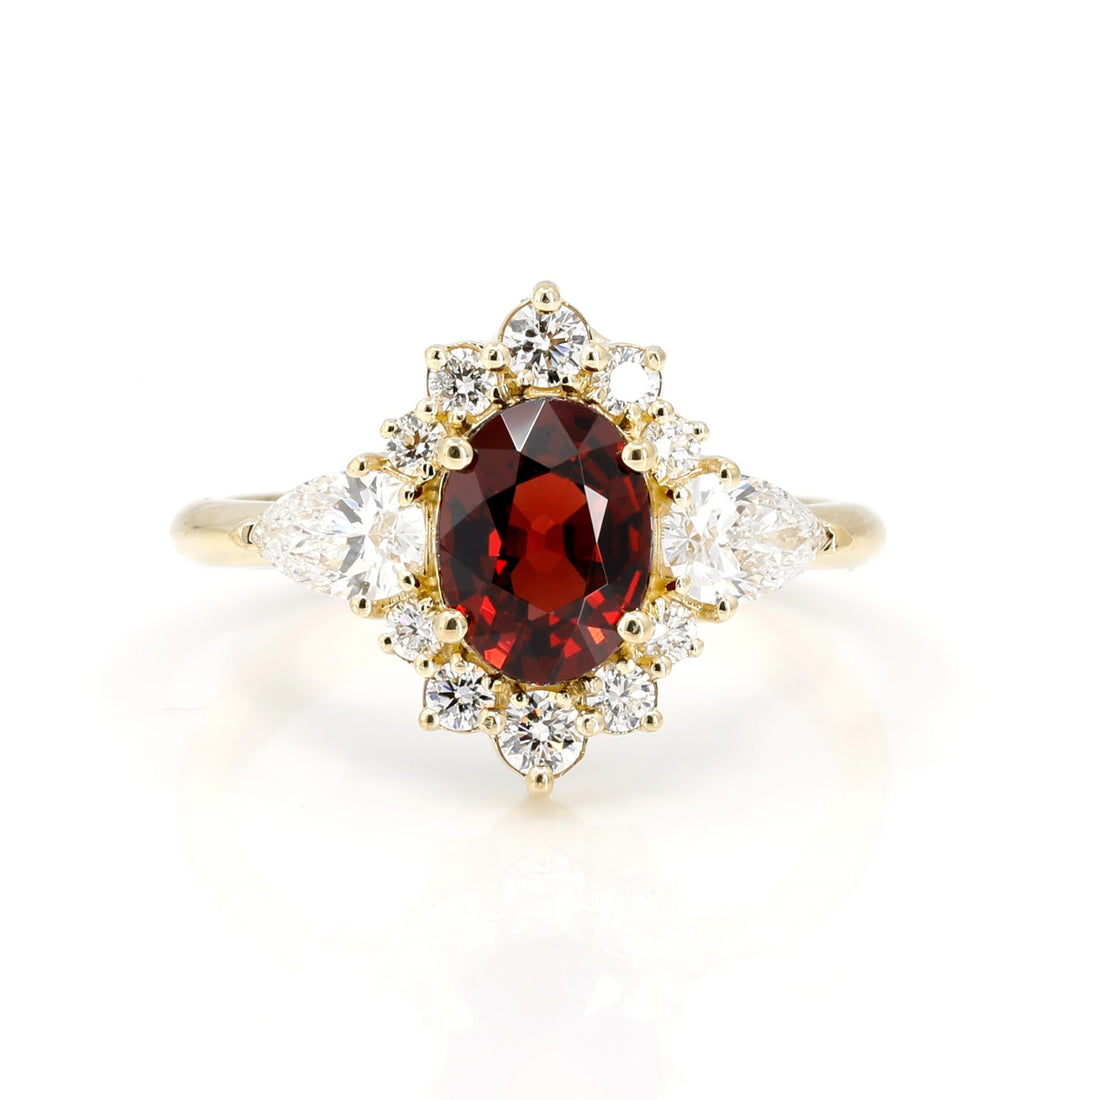 pyrope garnet diamond engagement ring custom made in montreal by bena jewelry on white background